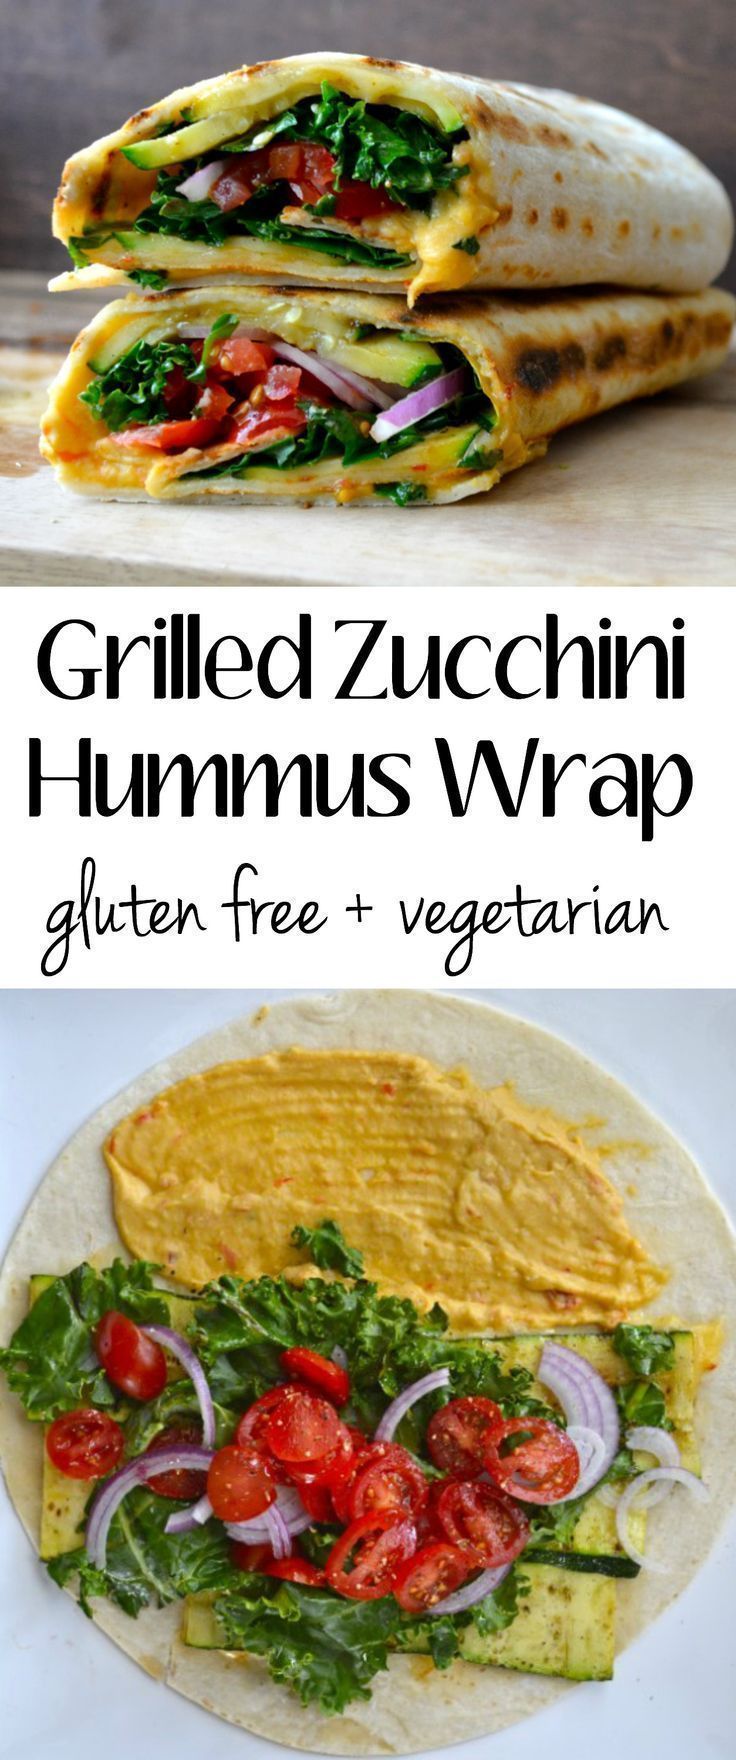 Fresh veggies are grilled to perfection and packed in this Grilled Zucchini Hummus